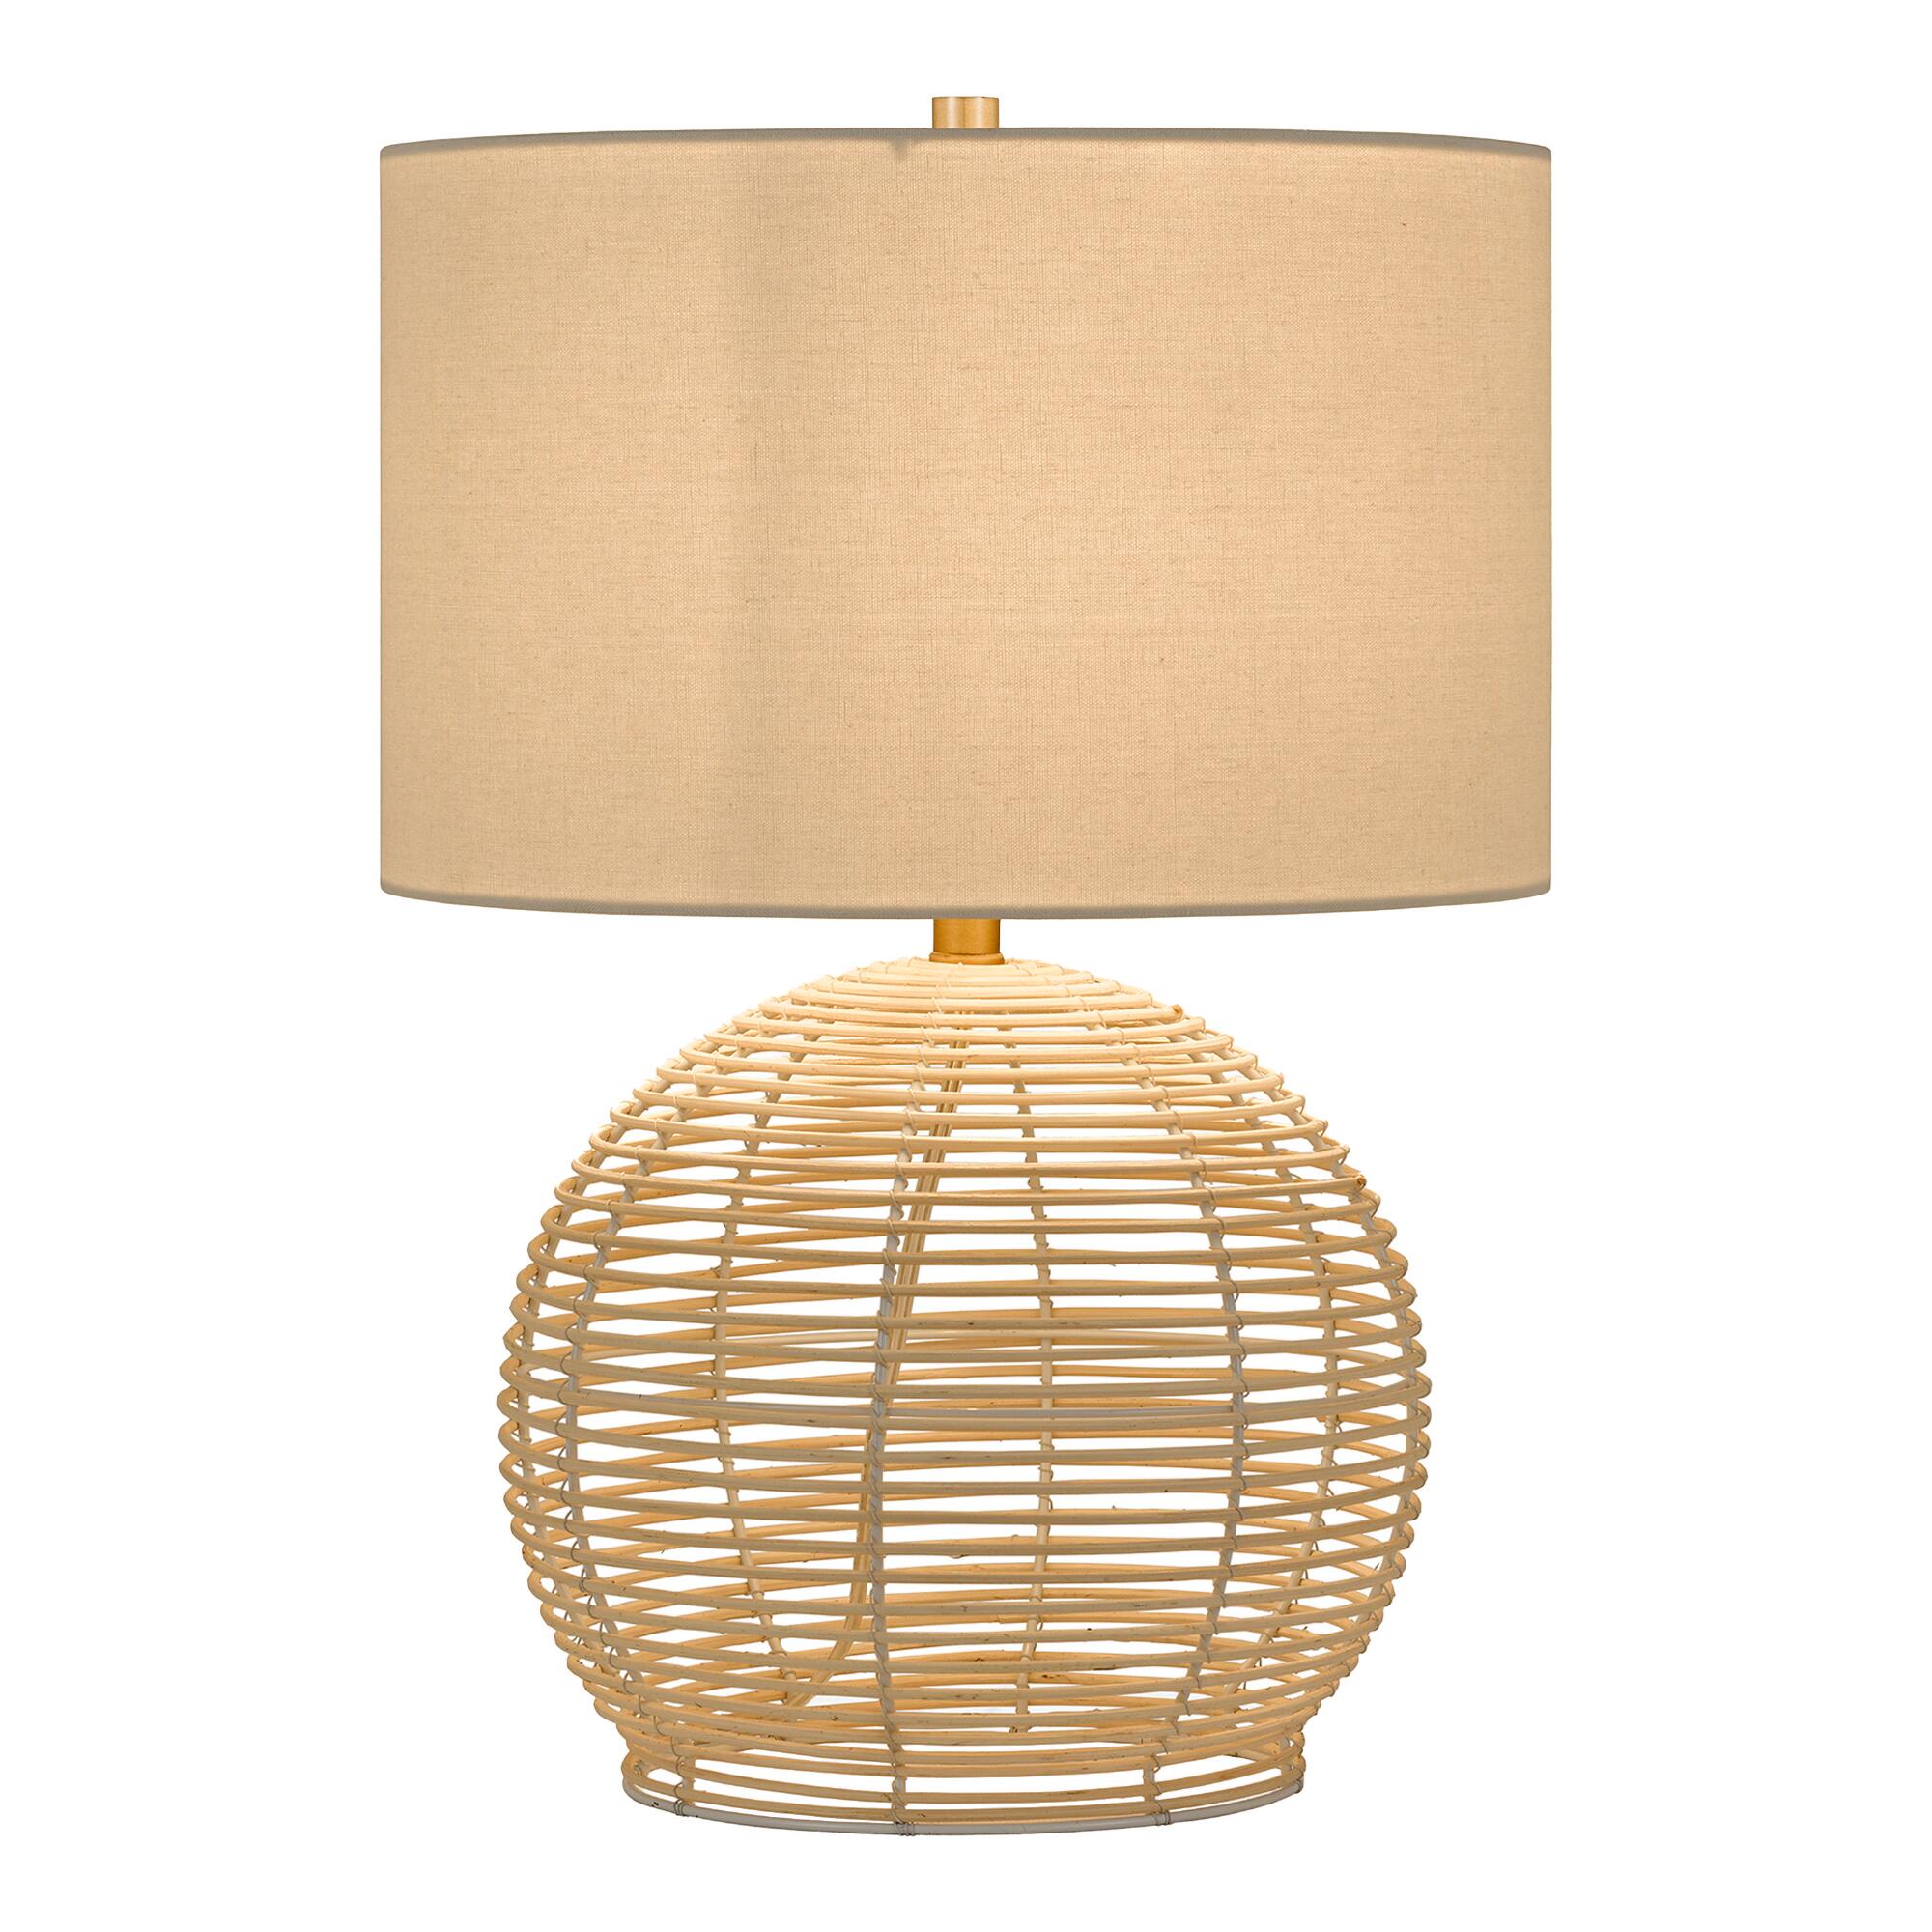 Natural Open Weave Rattan Marta Table Lamp by World Market